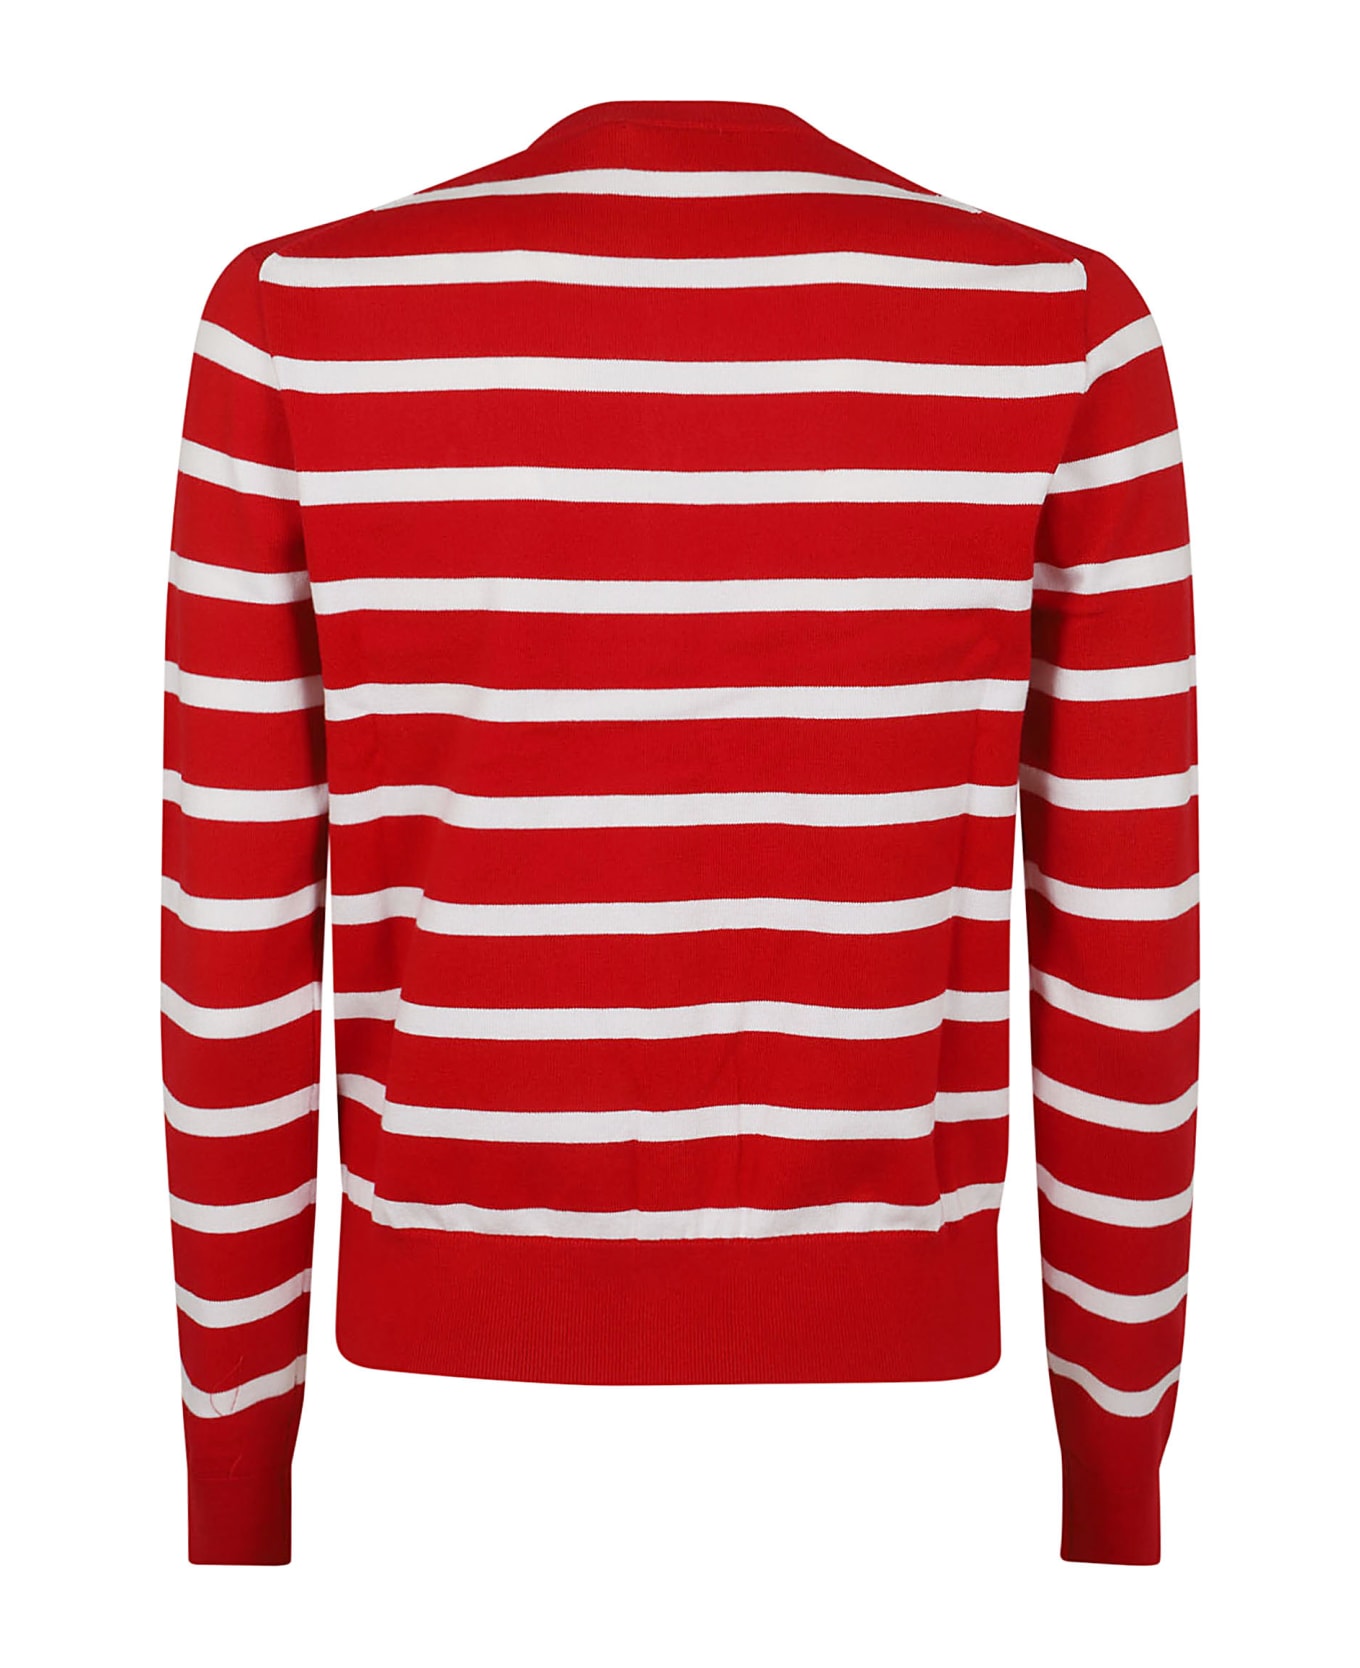 Polo Ralph Lauren Striped Cardigan - Red White